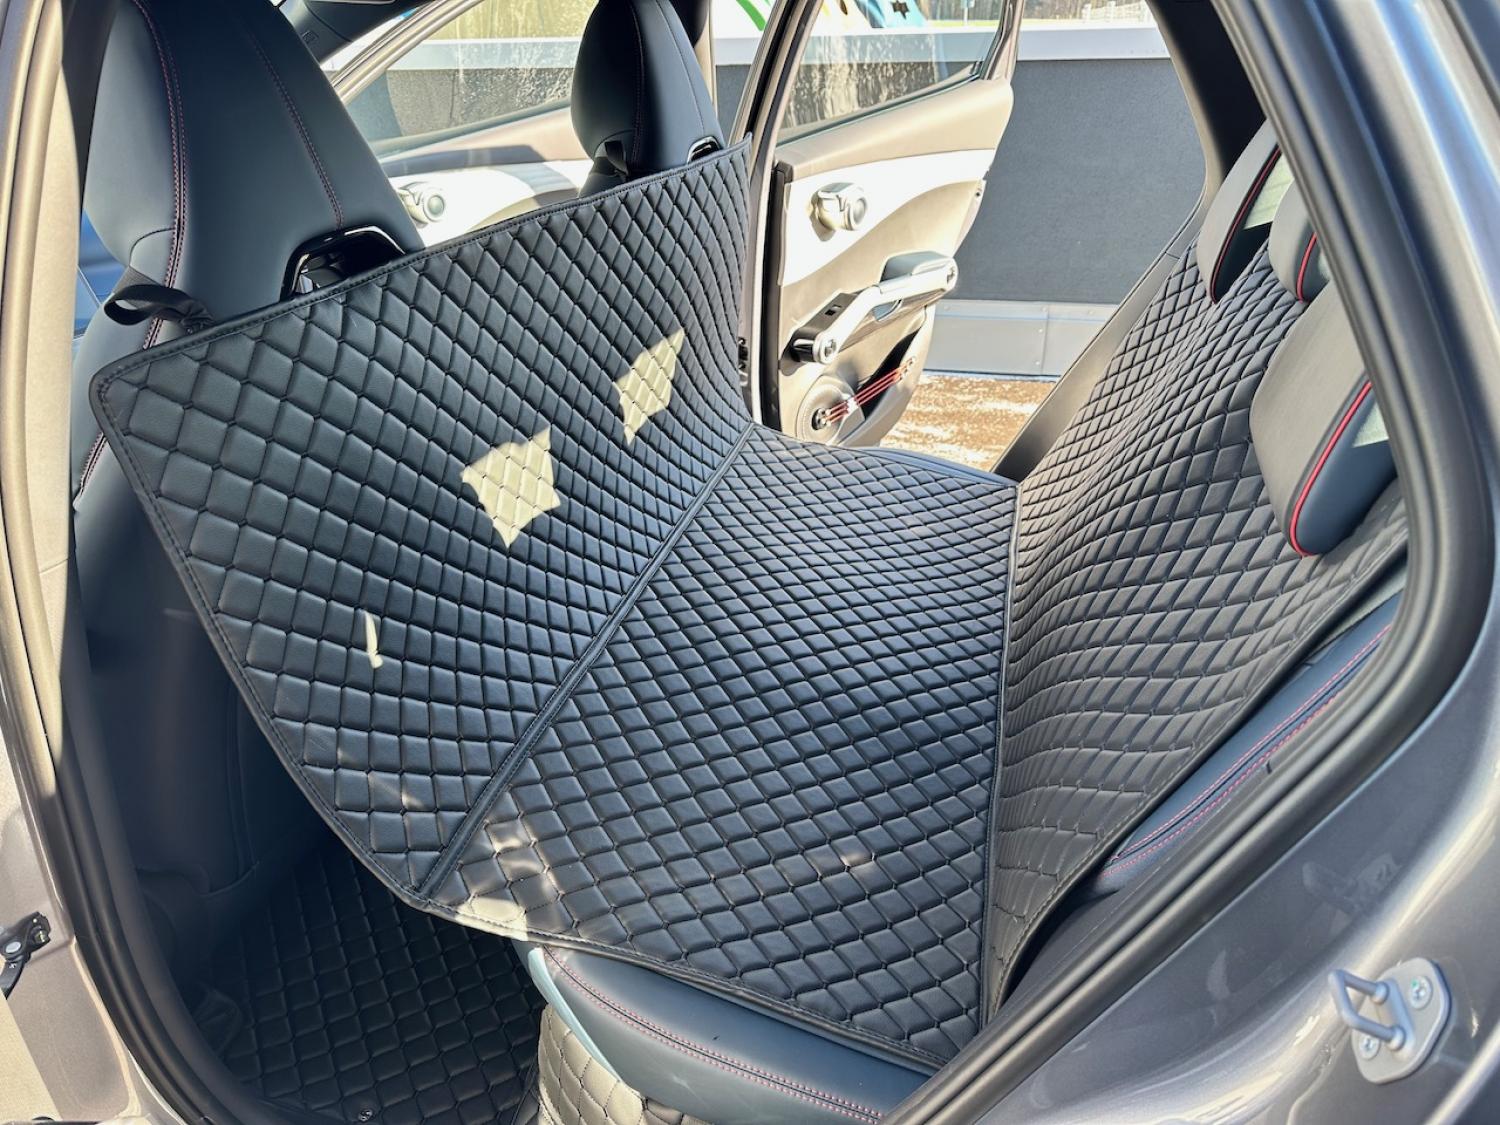 CARSTYLER® Back Seat Cover Geeignet Für Audi A5 F53 Cabriolet 2016-heute